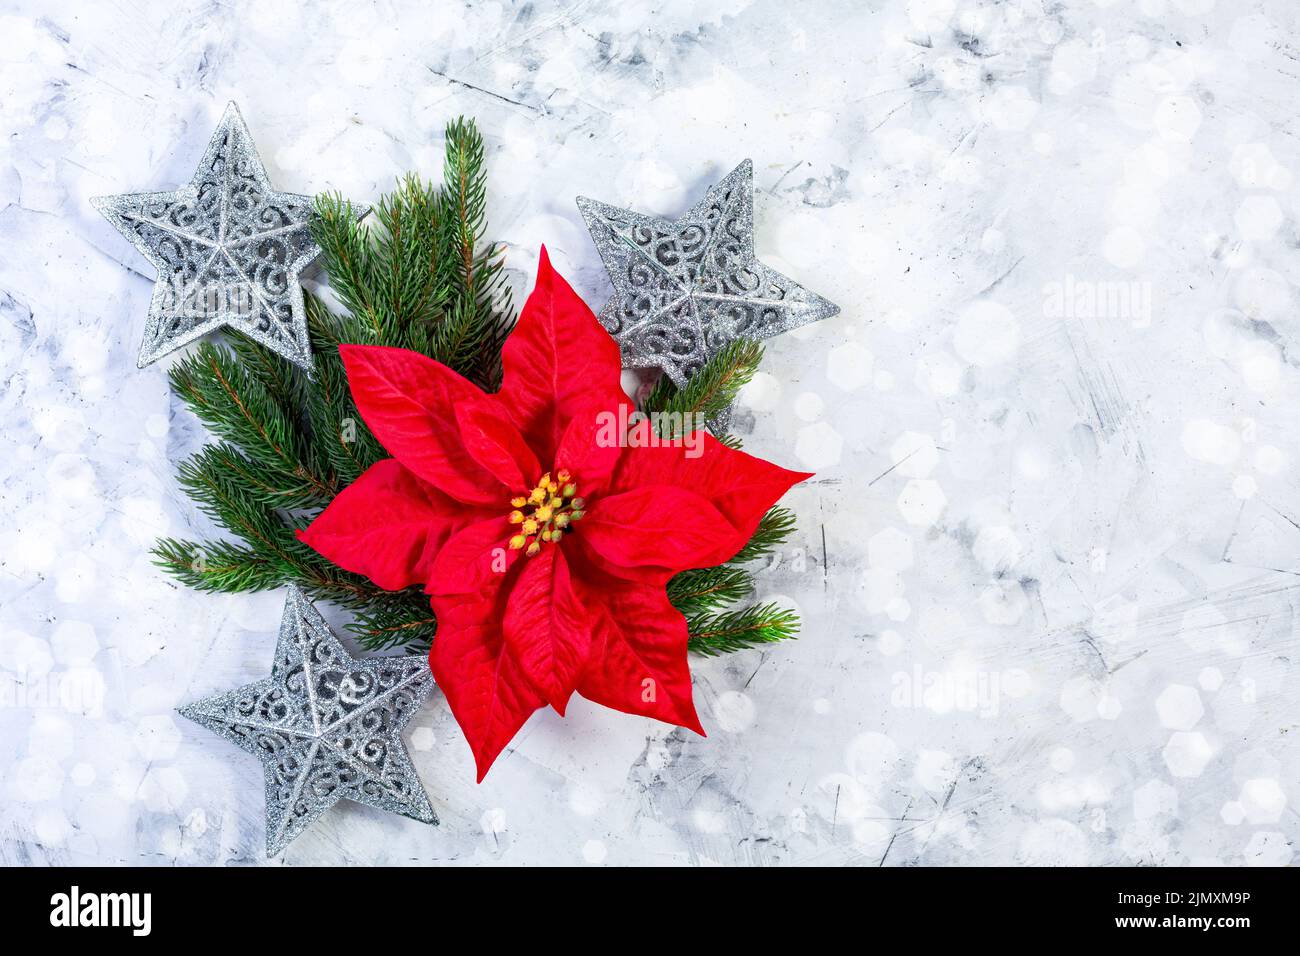 Christmas composition with red poinsettia and fir twigs. Stock Photo